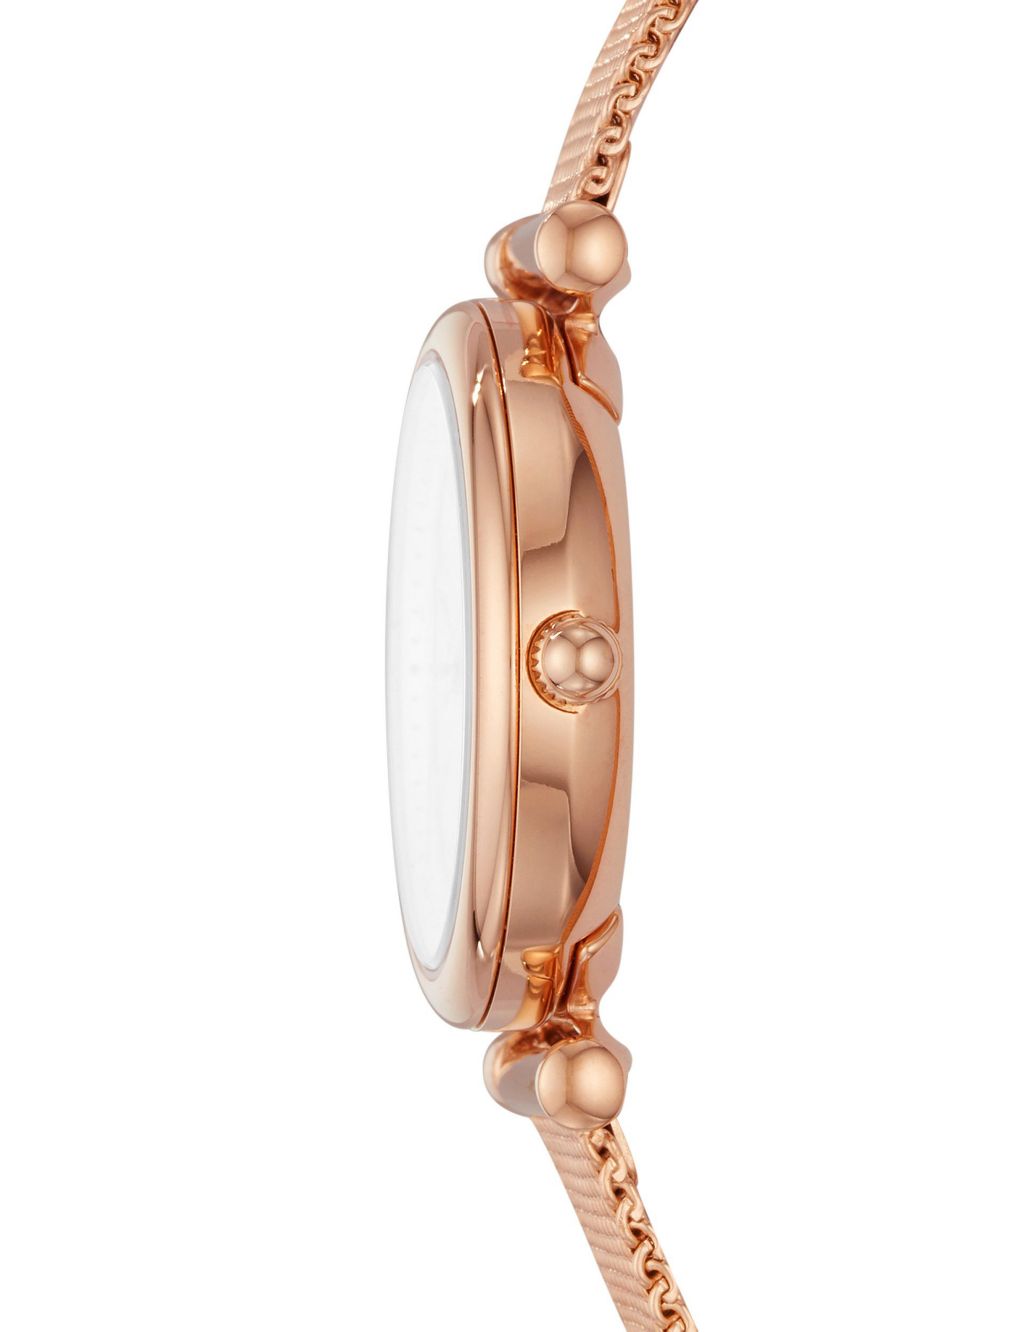 Fossil Carlie Rose Gold Metal Watch image 2